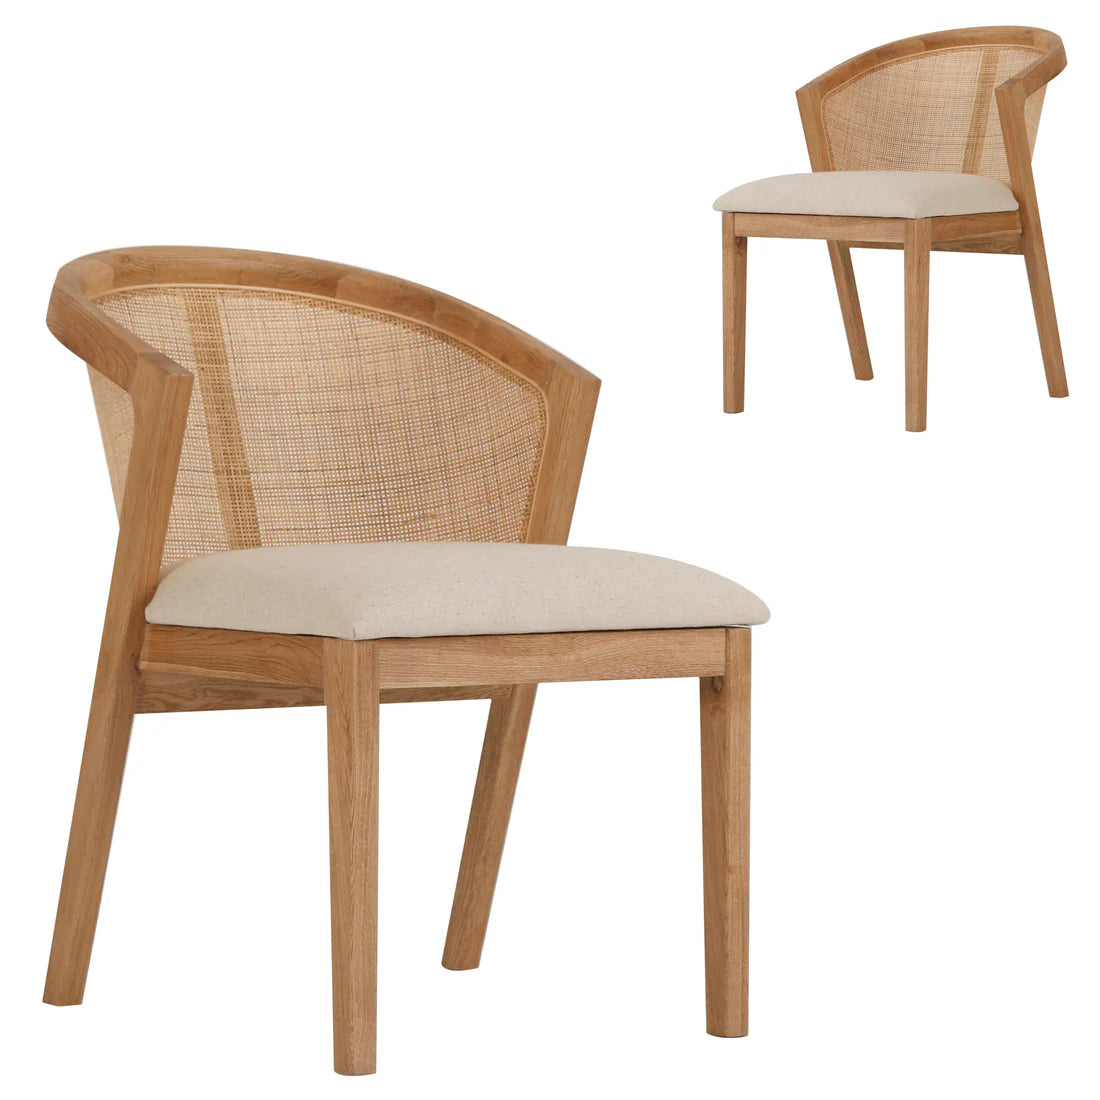 Highfield | Coastal Commercial Wooden Dining Chairs With Arms | Set Of 2